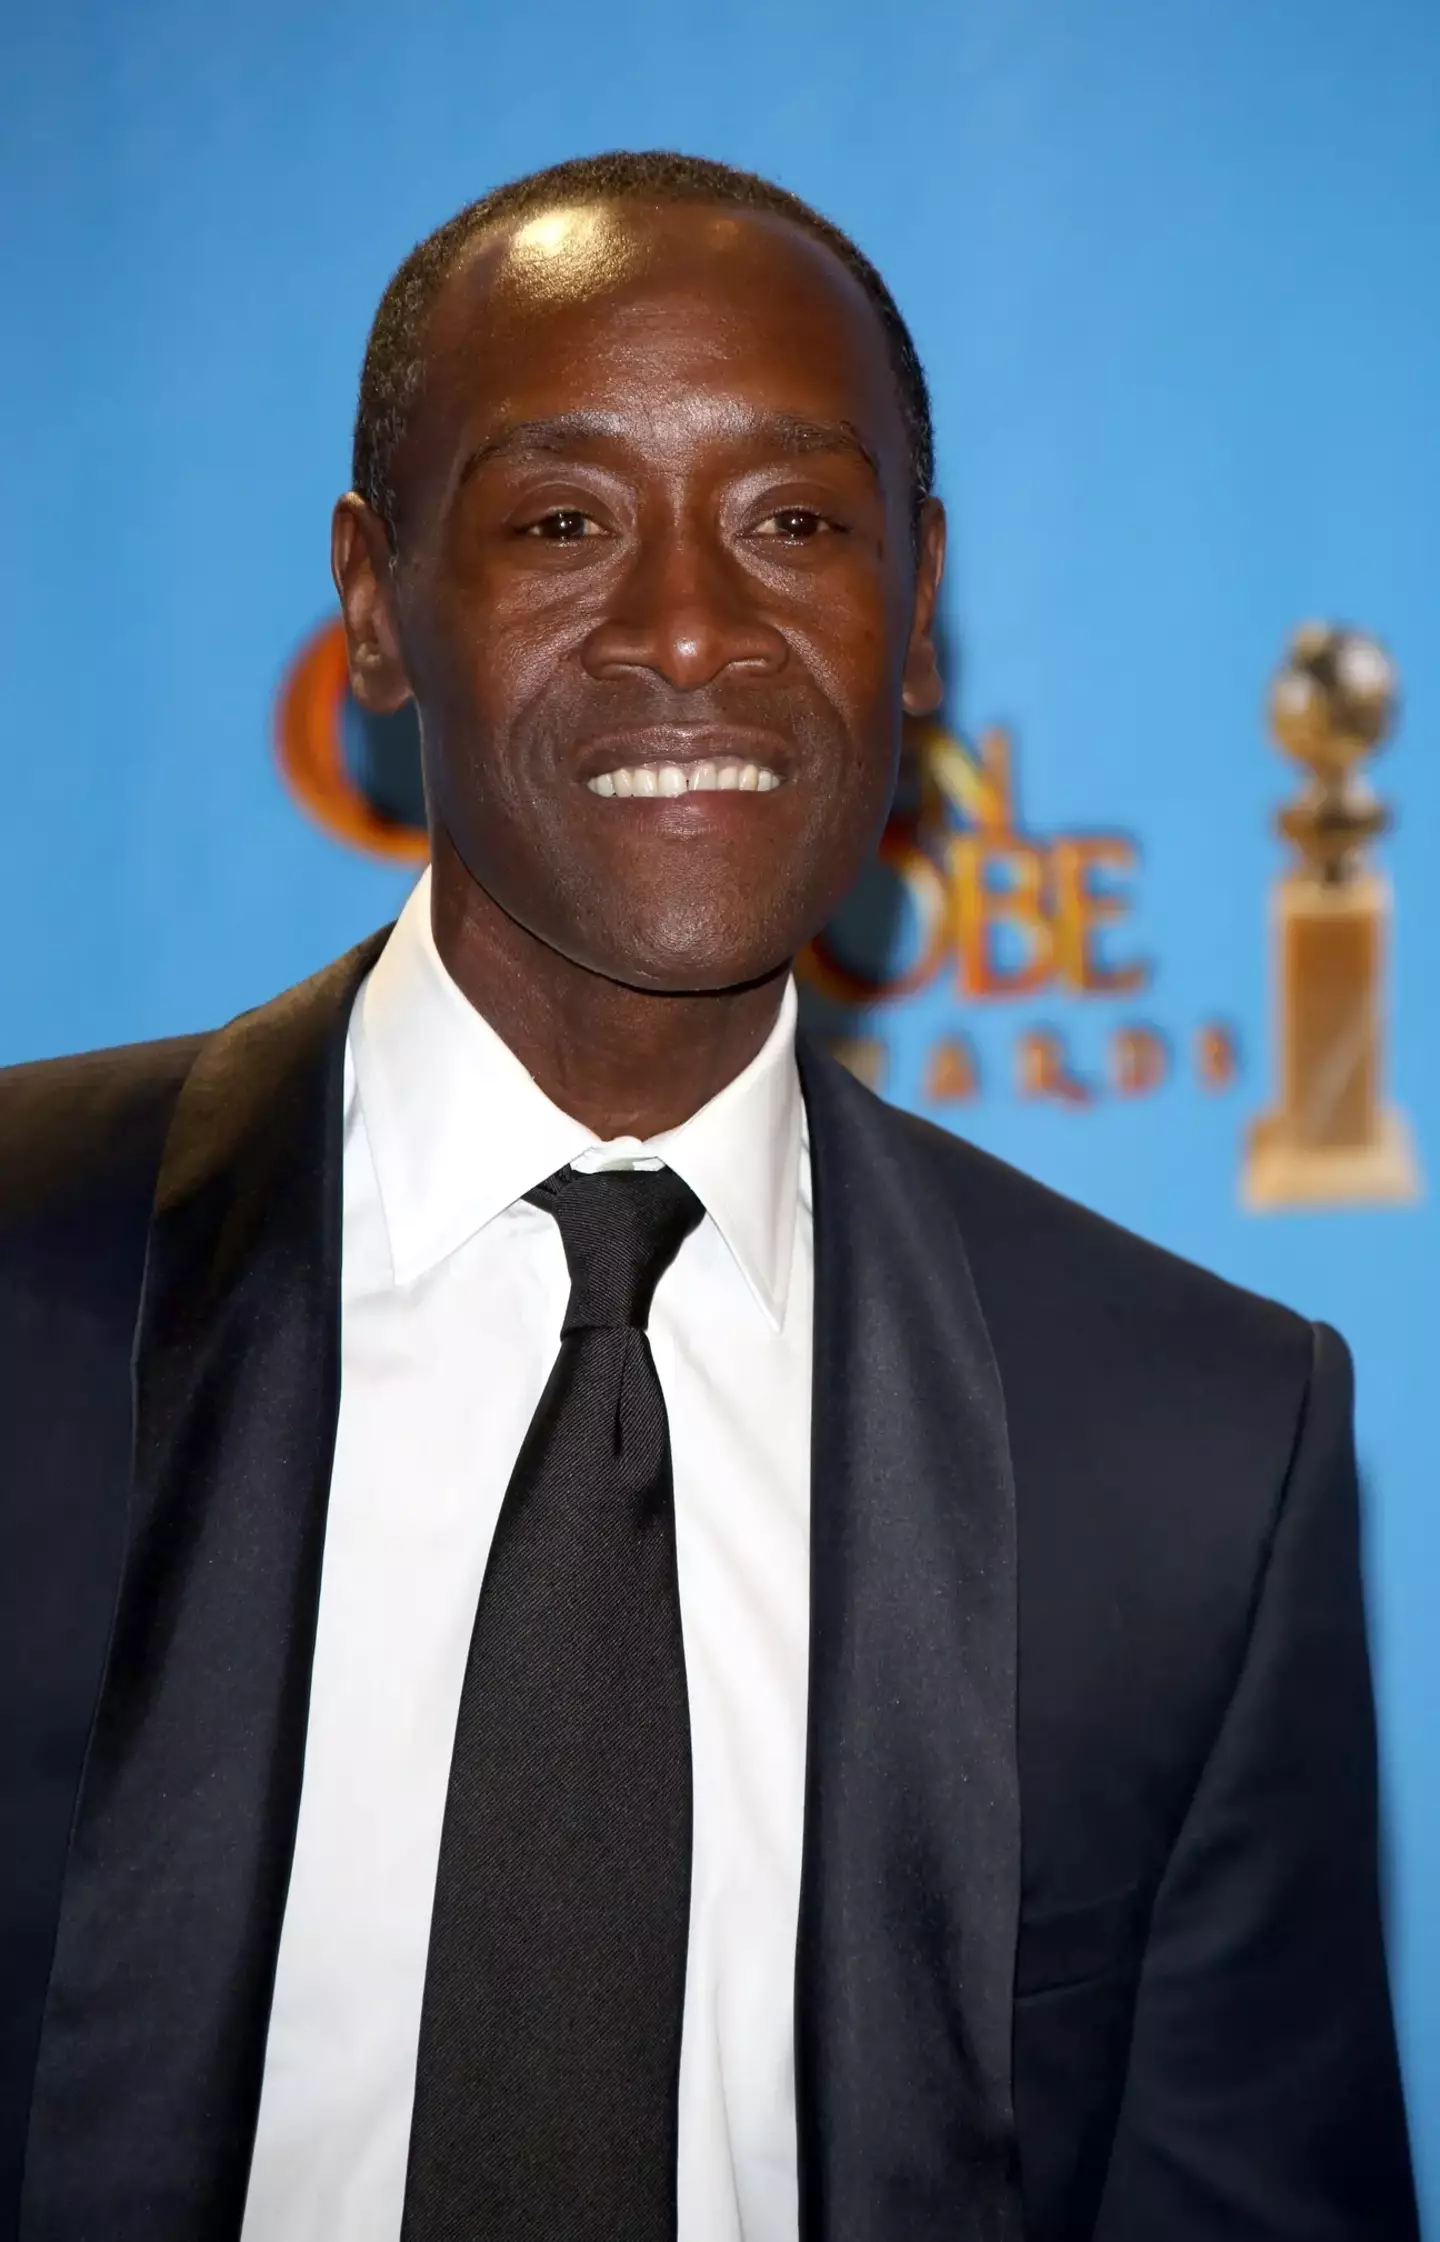 Don Cheadle took over the role as War Machine.